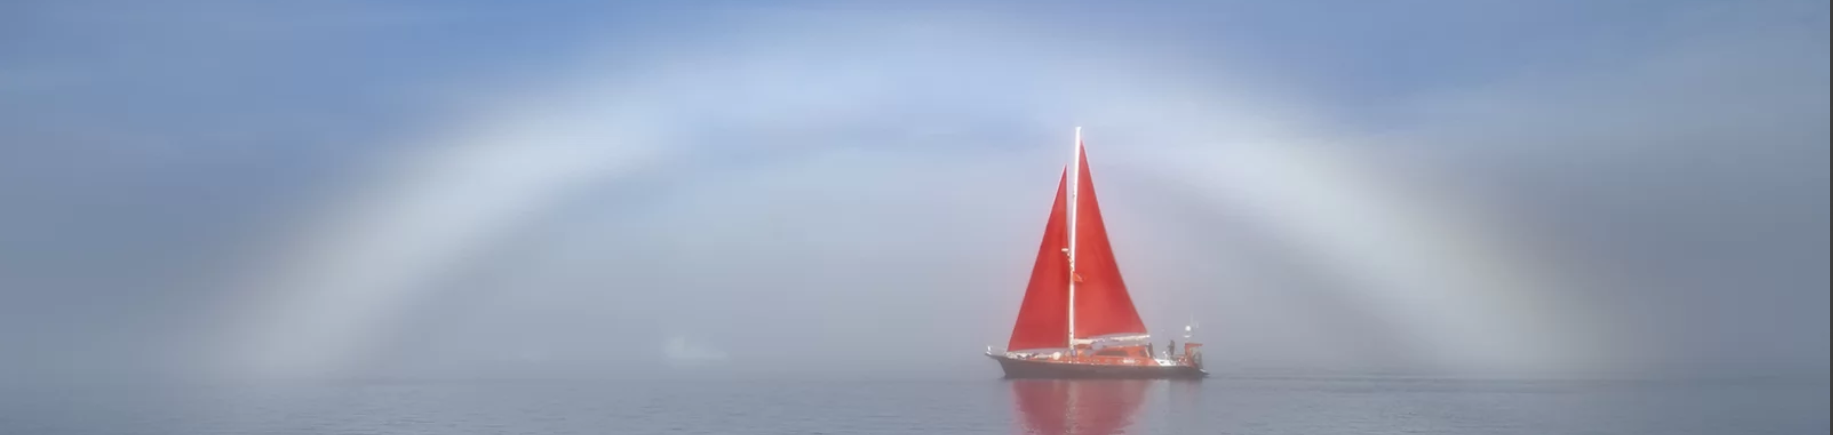 Red sailboat in front of a fogbow